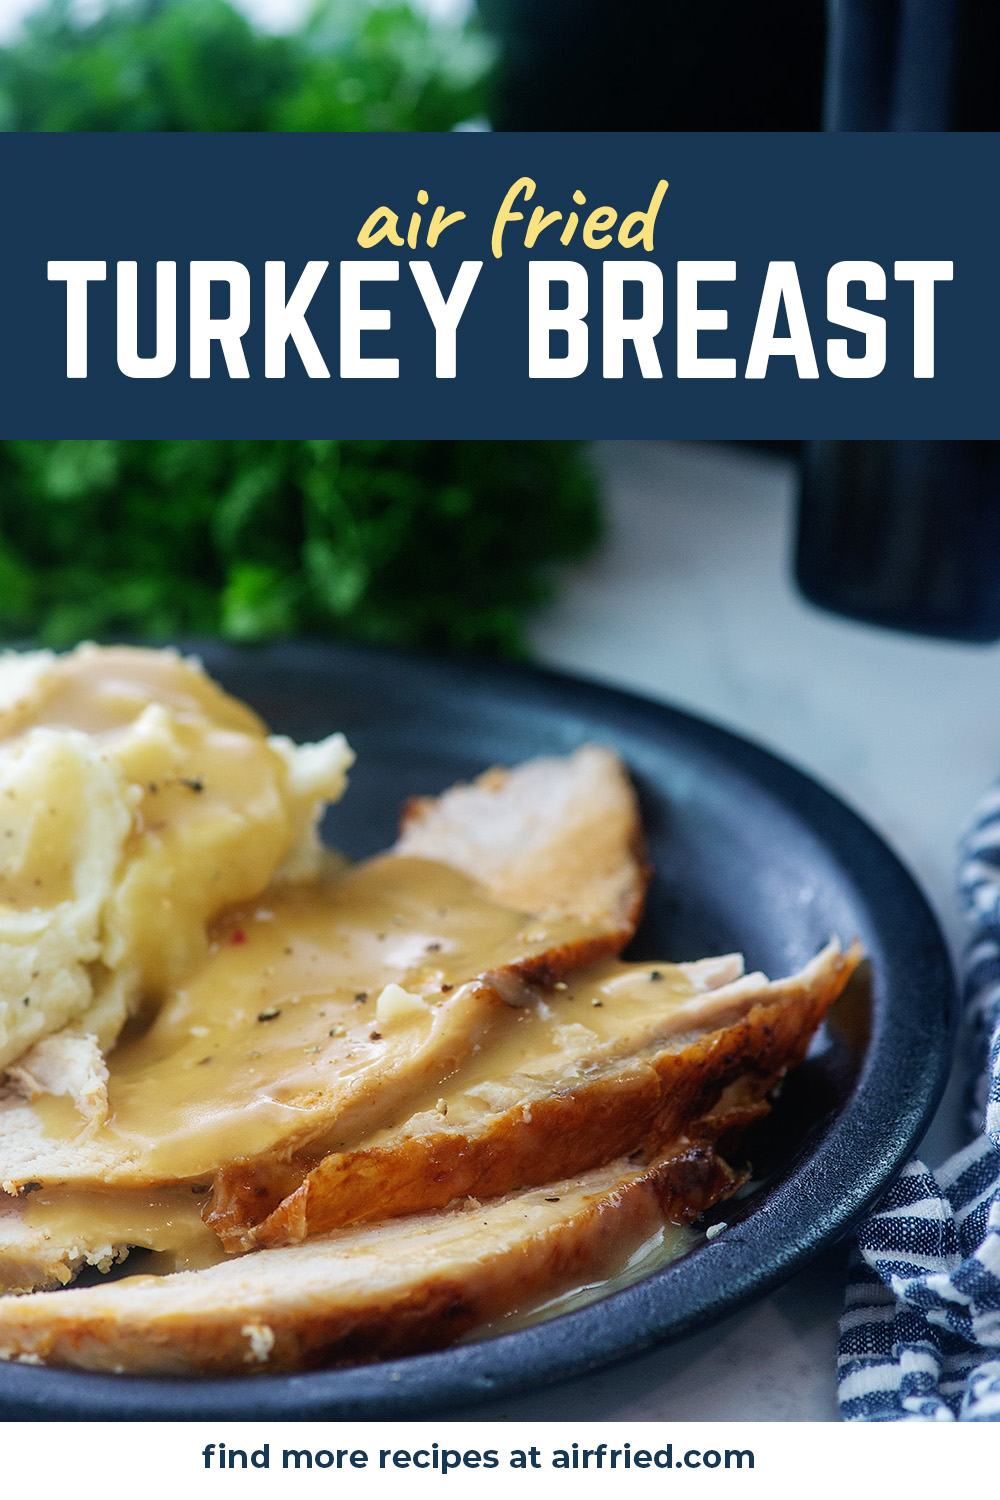 This turkey was so easy to cook in the air fryer!  Came out slightly juicy and cooked to perfection!  #airfried #recipes #turkey